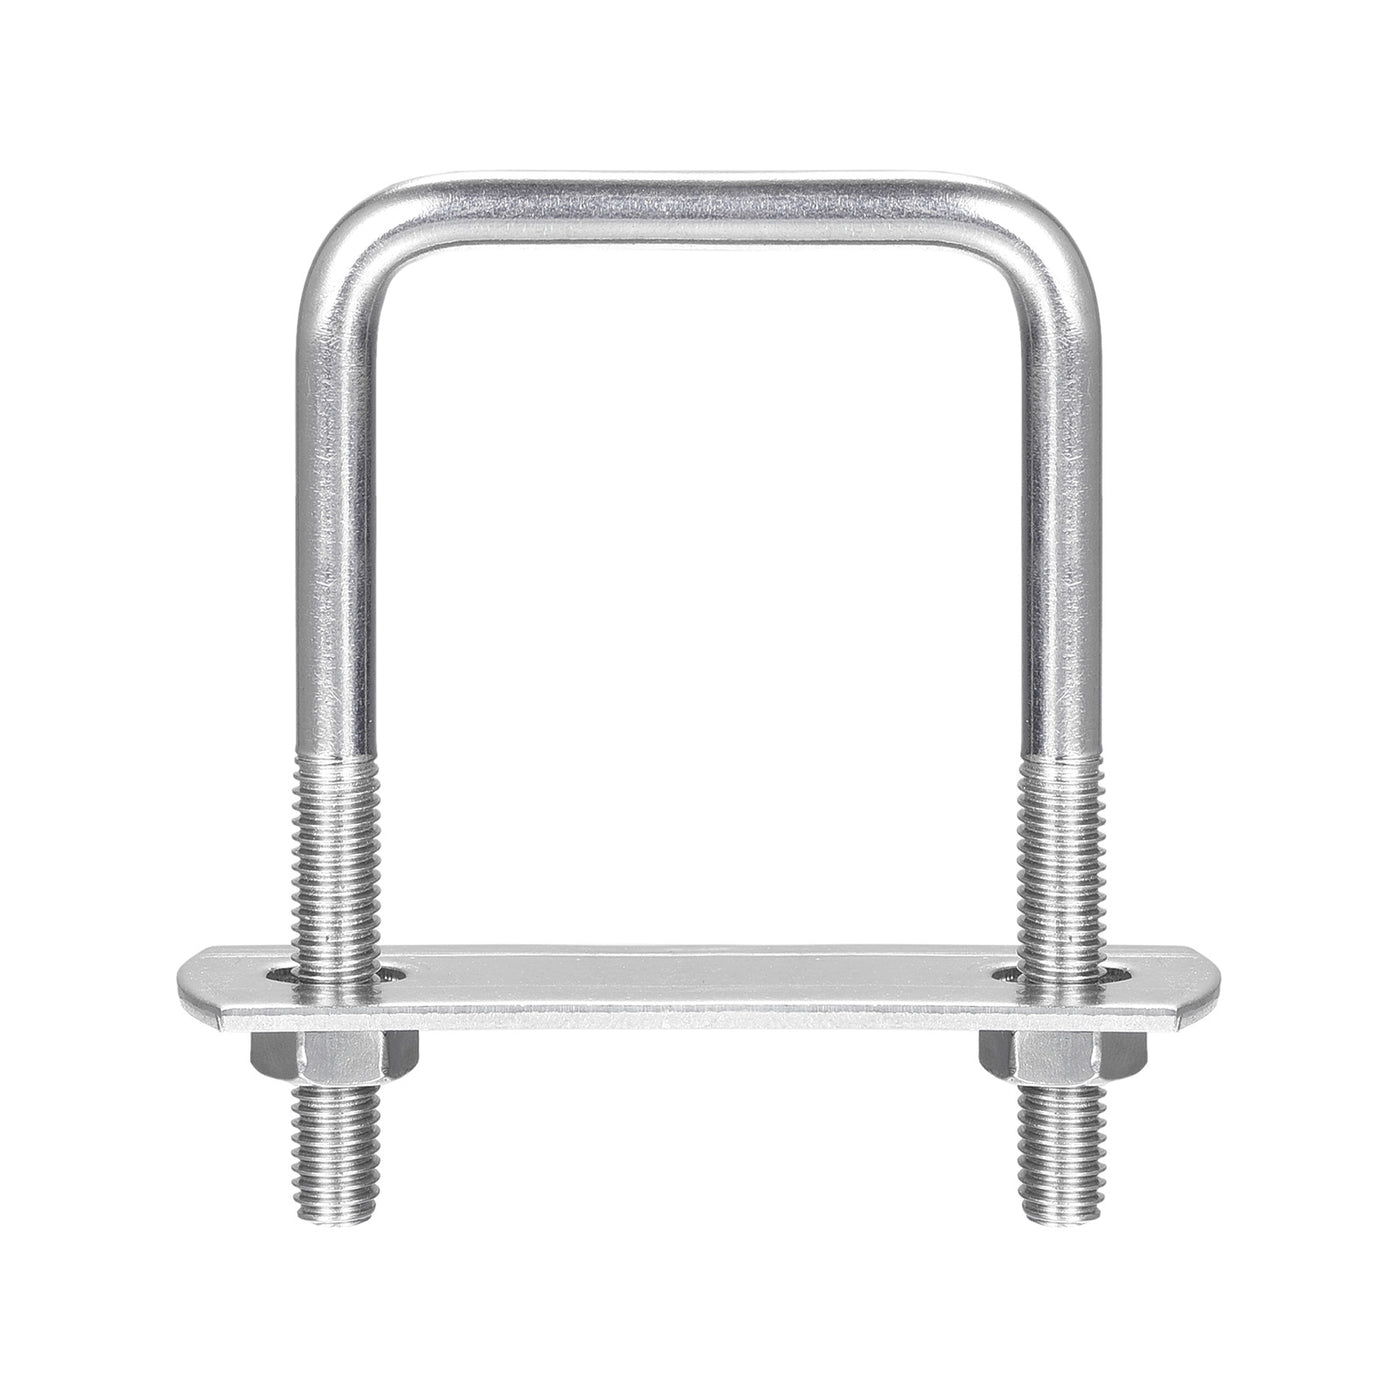 uxcell Uxcell Square U-Bolts 304 Stainless Steel, U Bolt with Nuts and Plates, for Boat Trailer